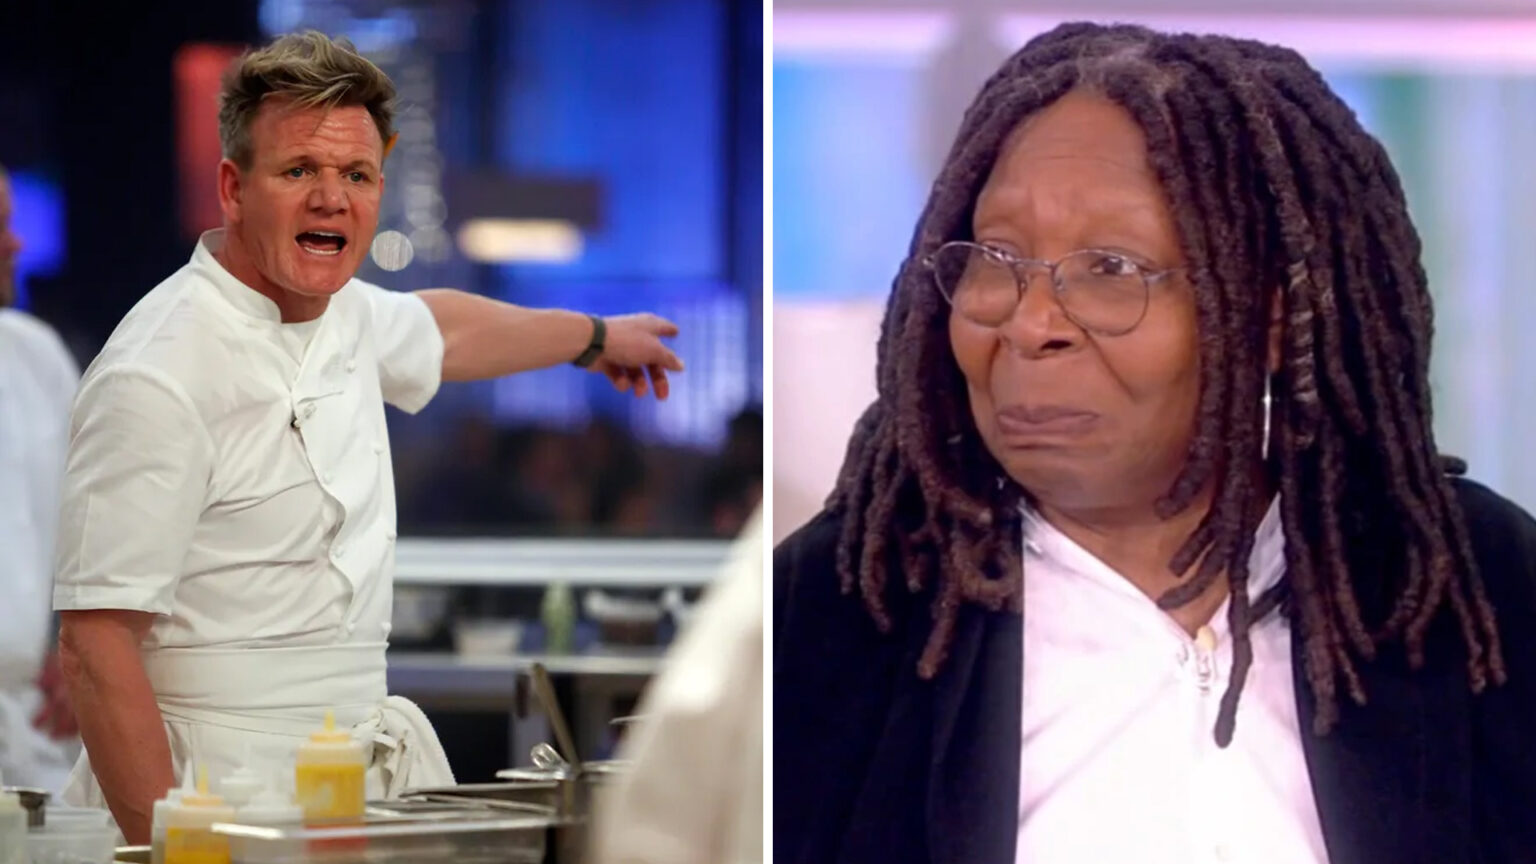 Just in: Gordon Ramsay Throws Whoopi Goldberg Out of His Restaurant